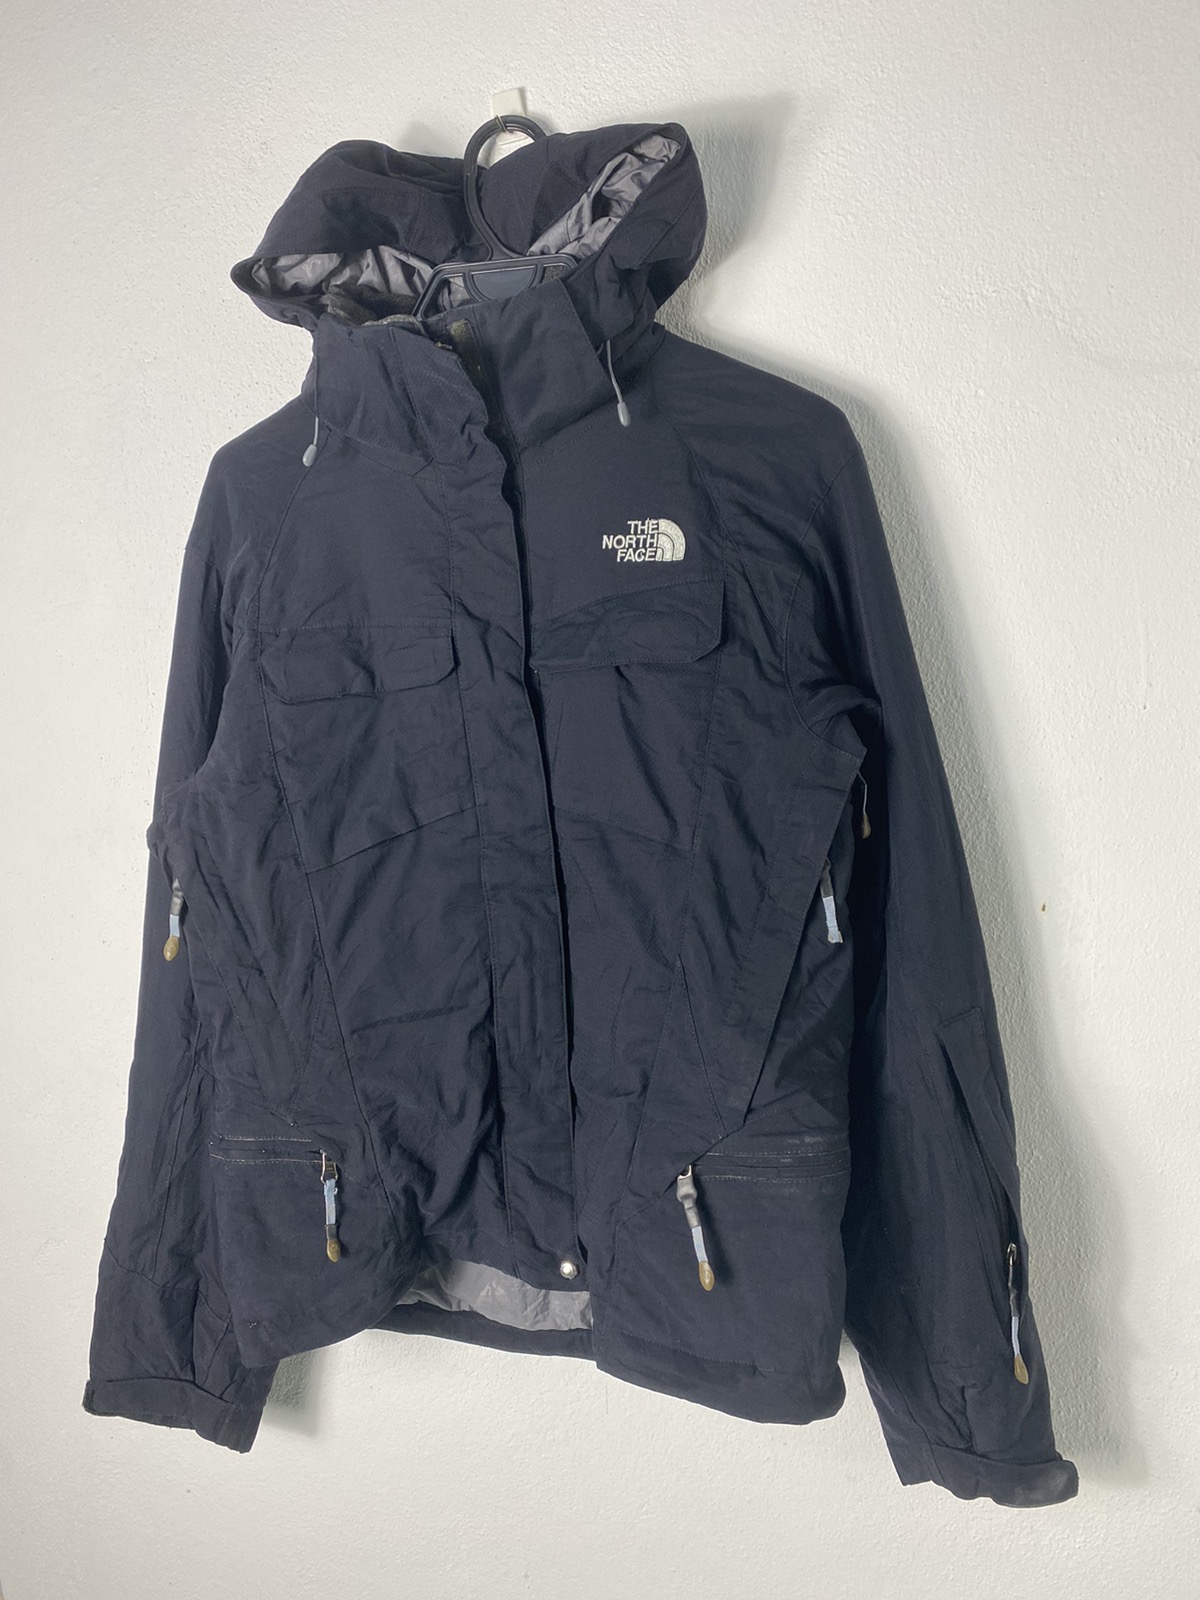 The North Face Hyvent Multipocket Jacket - 2